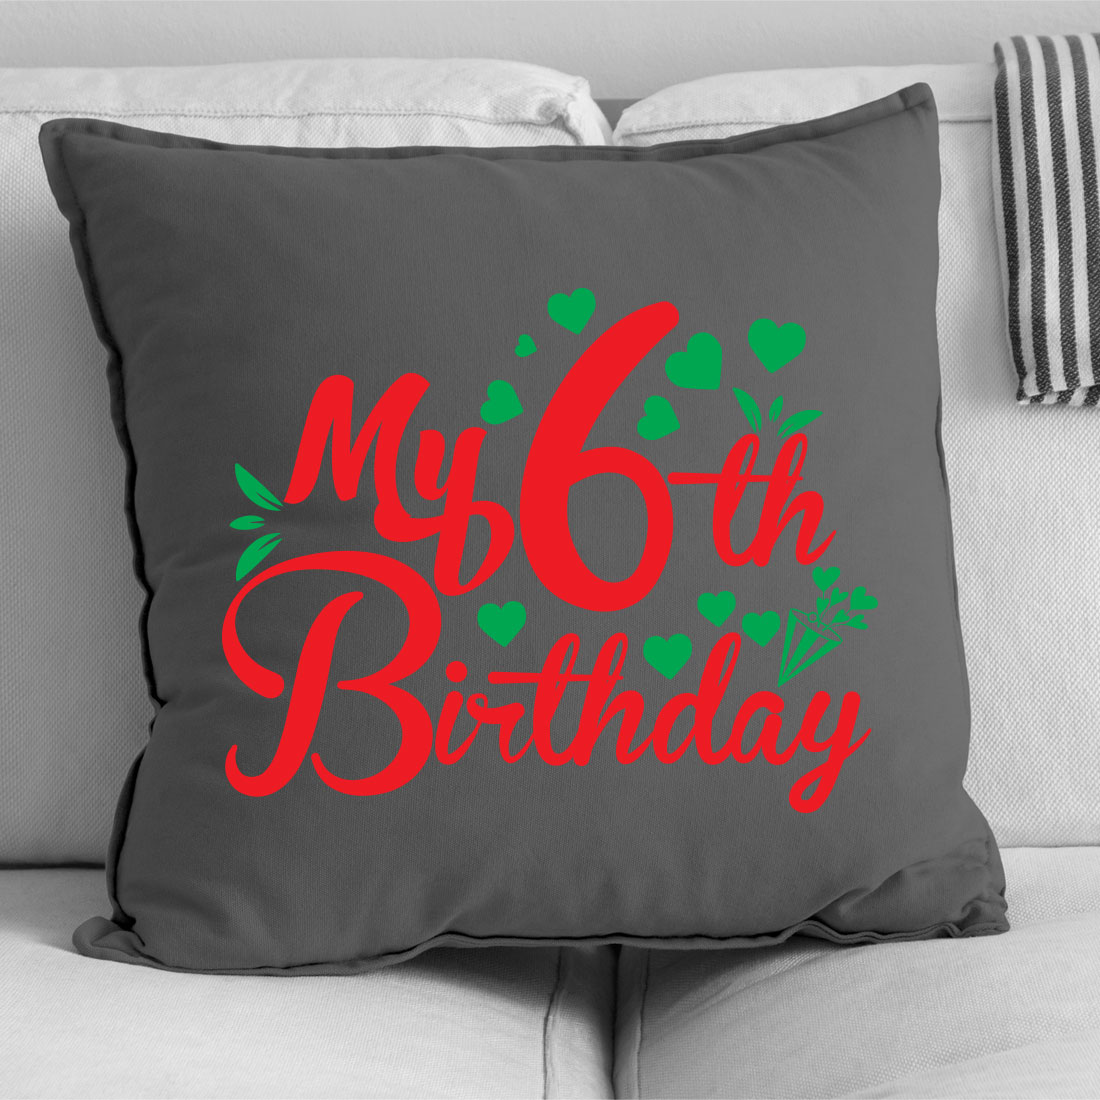 Pillow that says my 6th birthday on it.